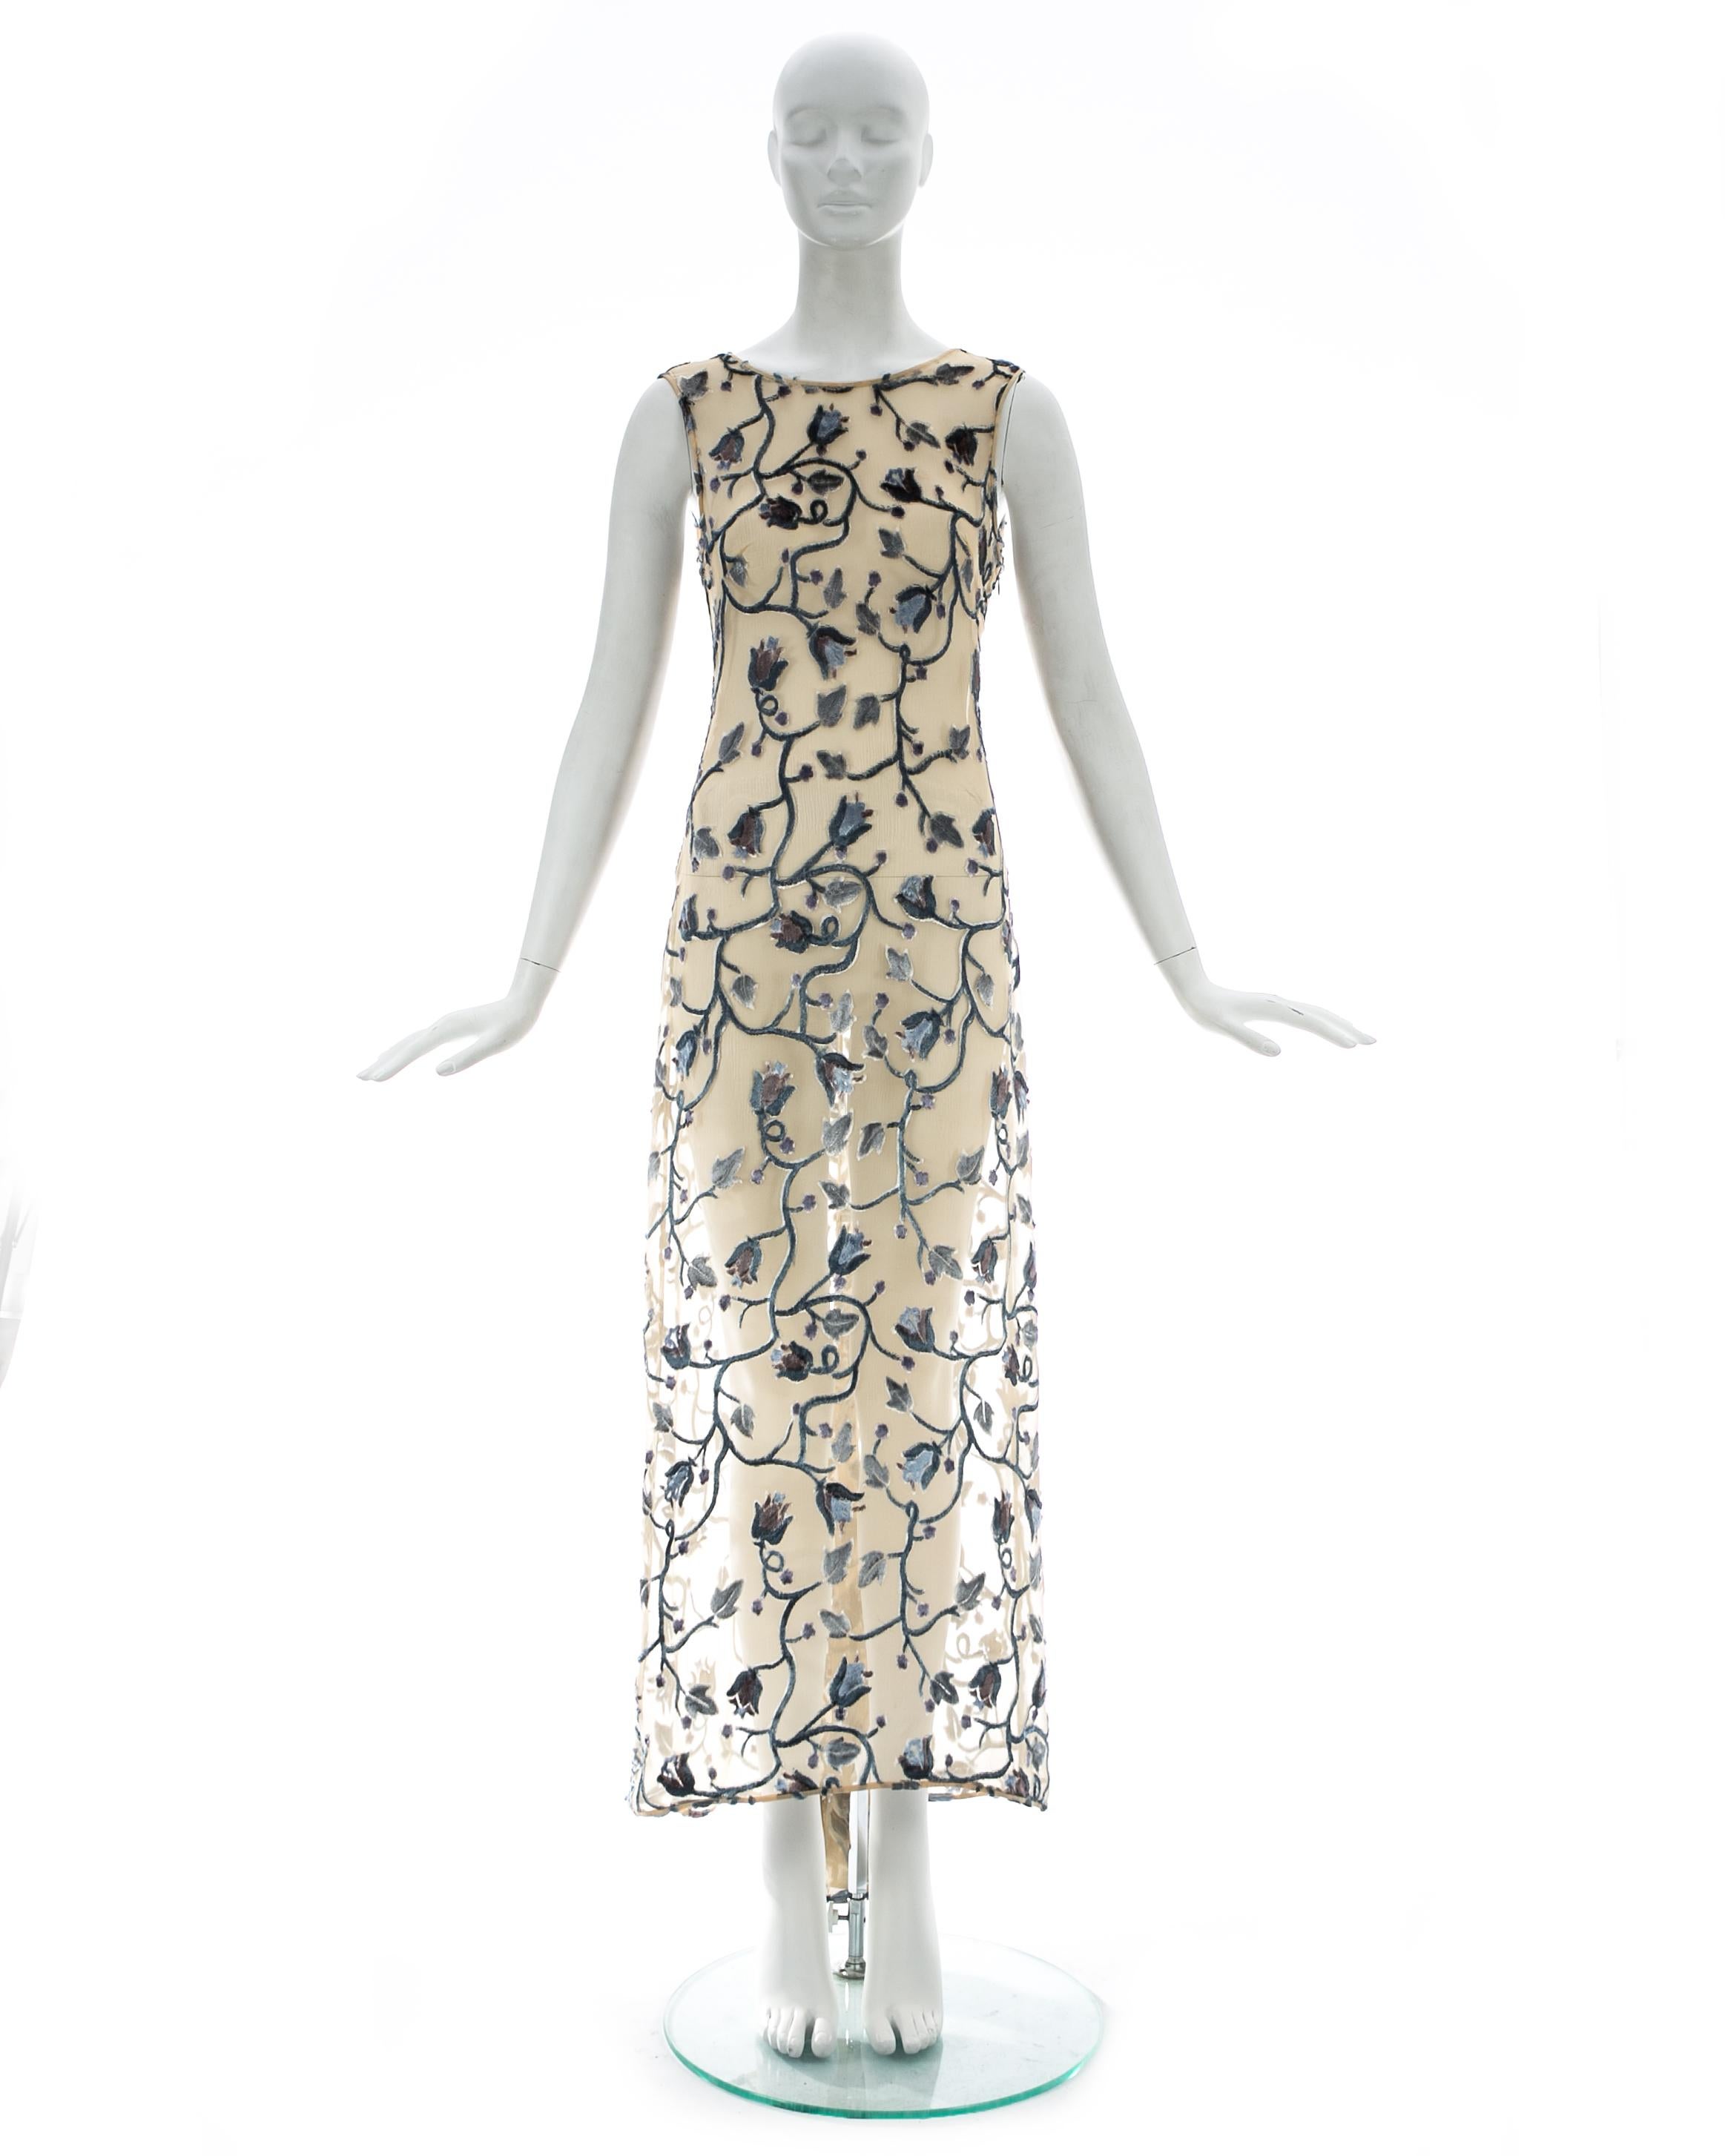 Prada ivory silk devoré floral maxi dress with train and nude silk slip dress 

Spring-Summer 1997

*The first 2 images are worn without the nude slip dress